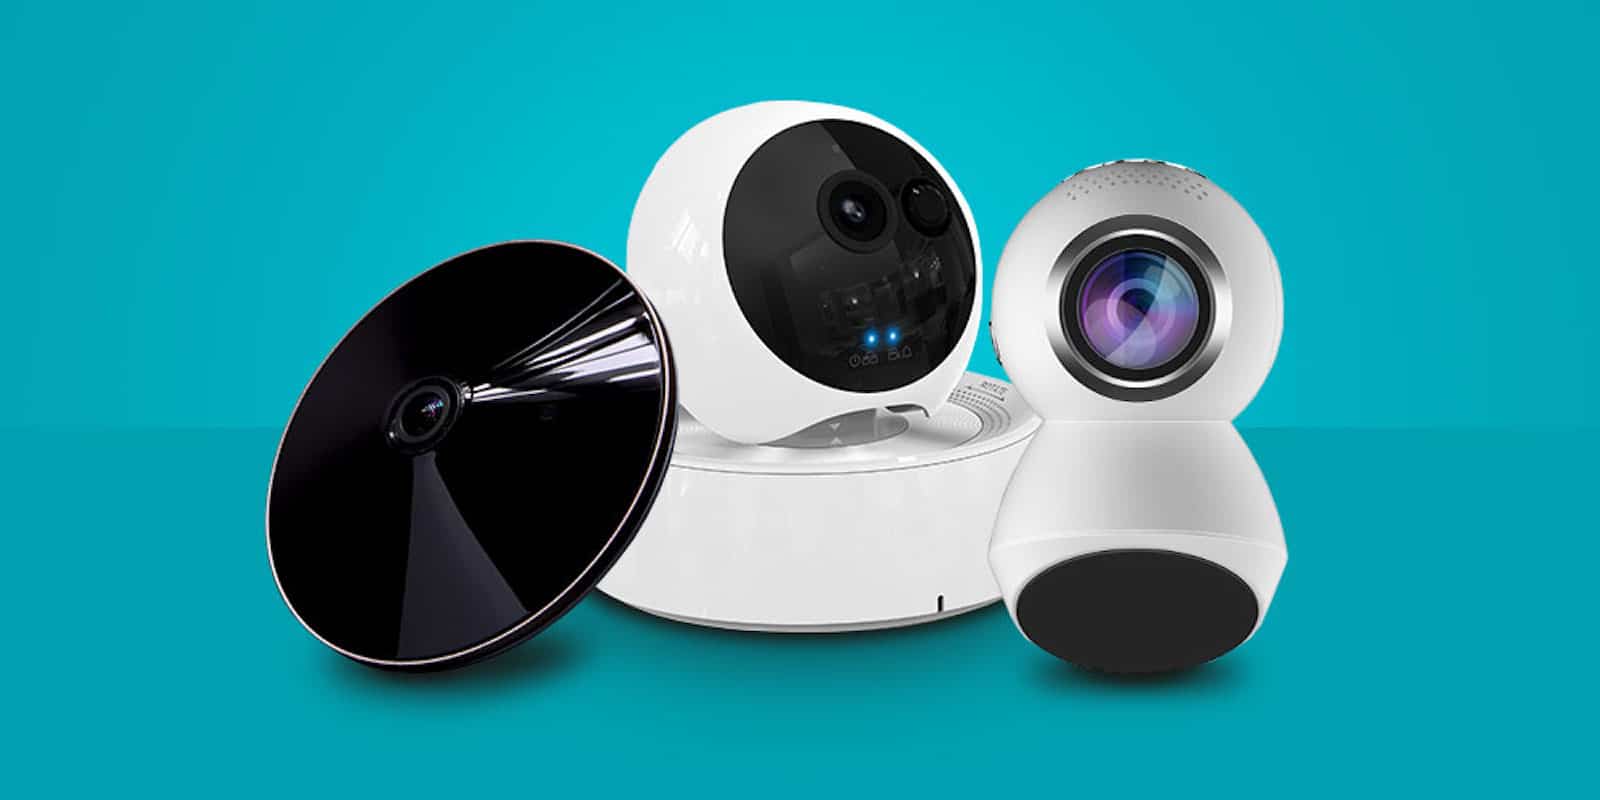 This WiFi camera means you can rmotely monitor or even communicate with your home or office.